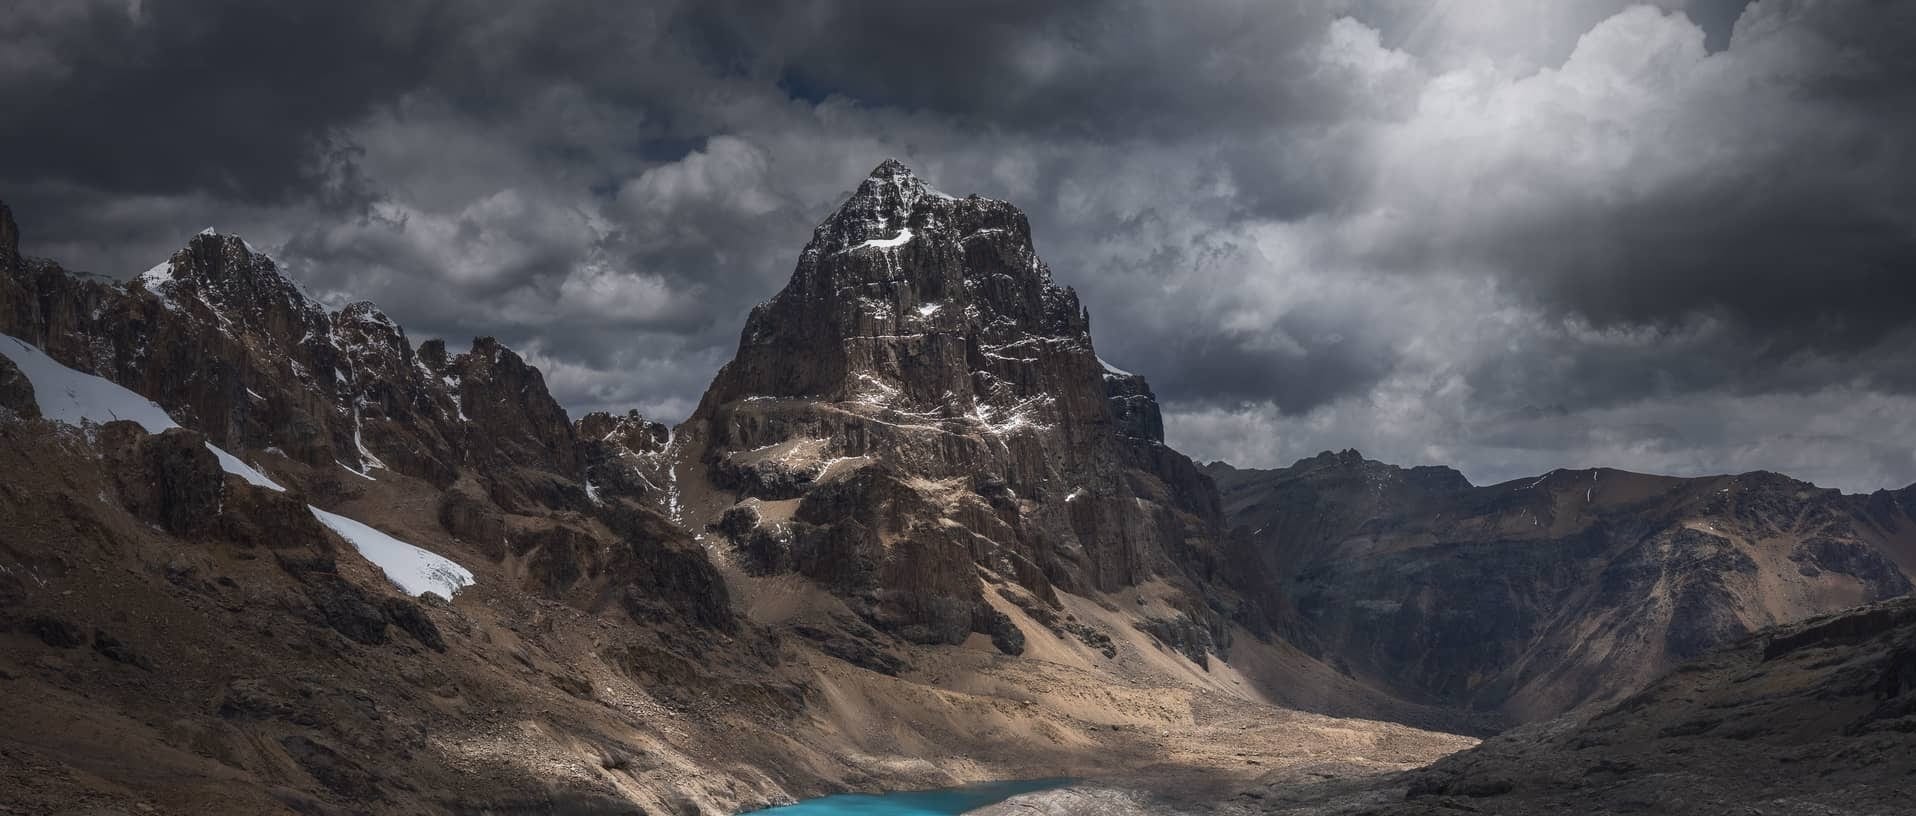 Hiking under changing weather in Peru, unique photography experience